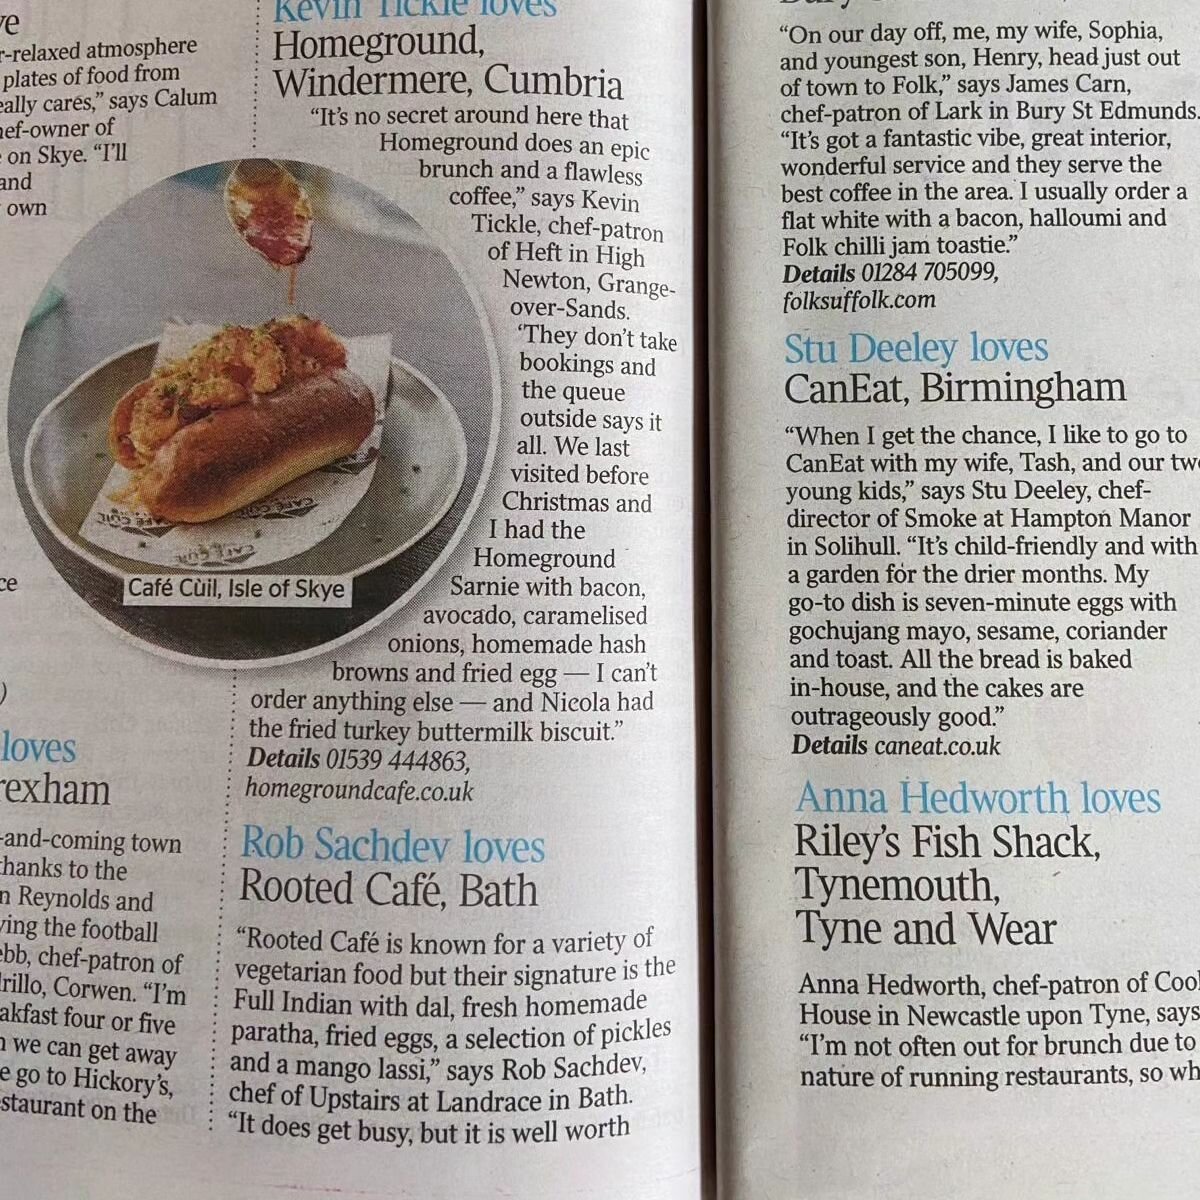 We are so incredibly happy and super proud to be featured in @thetimes in their 27 best places for brunch - where the top chefs book. Thank you @rob_sachdev at @landraceupstairs for the mention 🙌

#batheats #thetimesfood #thetimesweekend #bathindepe